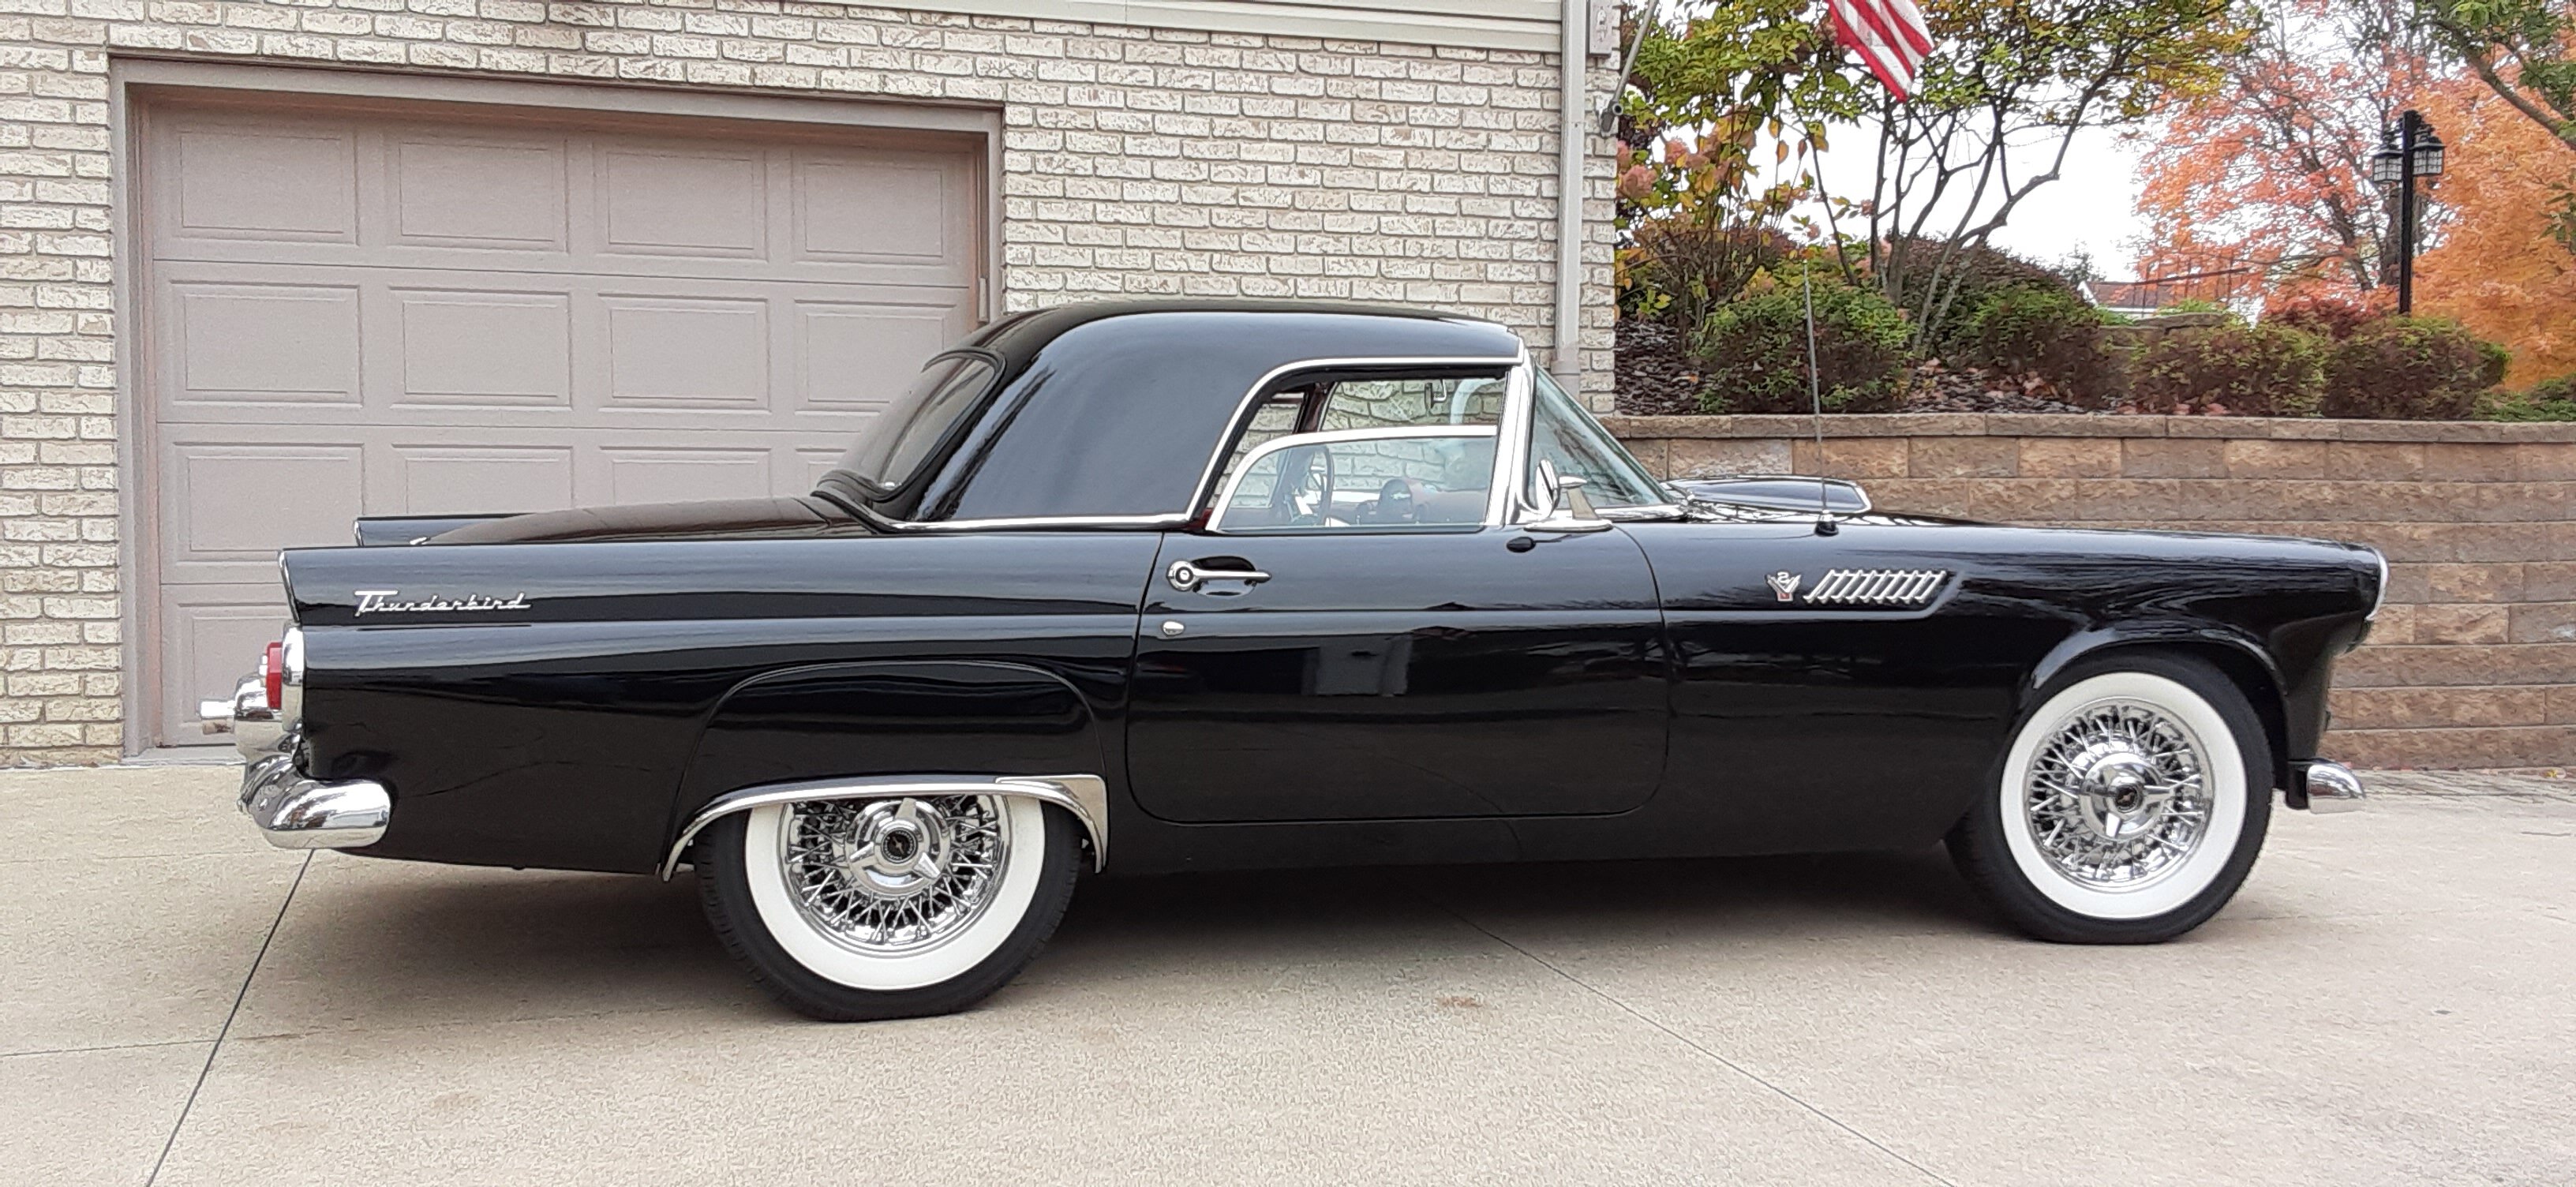 1955 Ford Thunderbird With Hard Top on